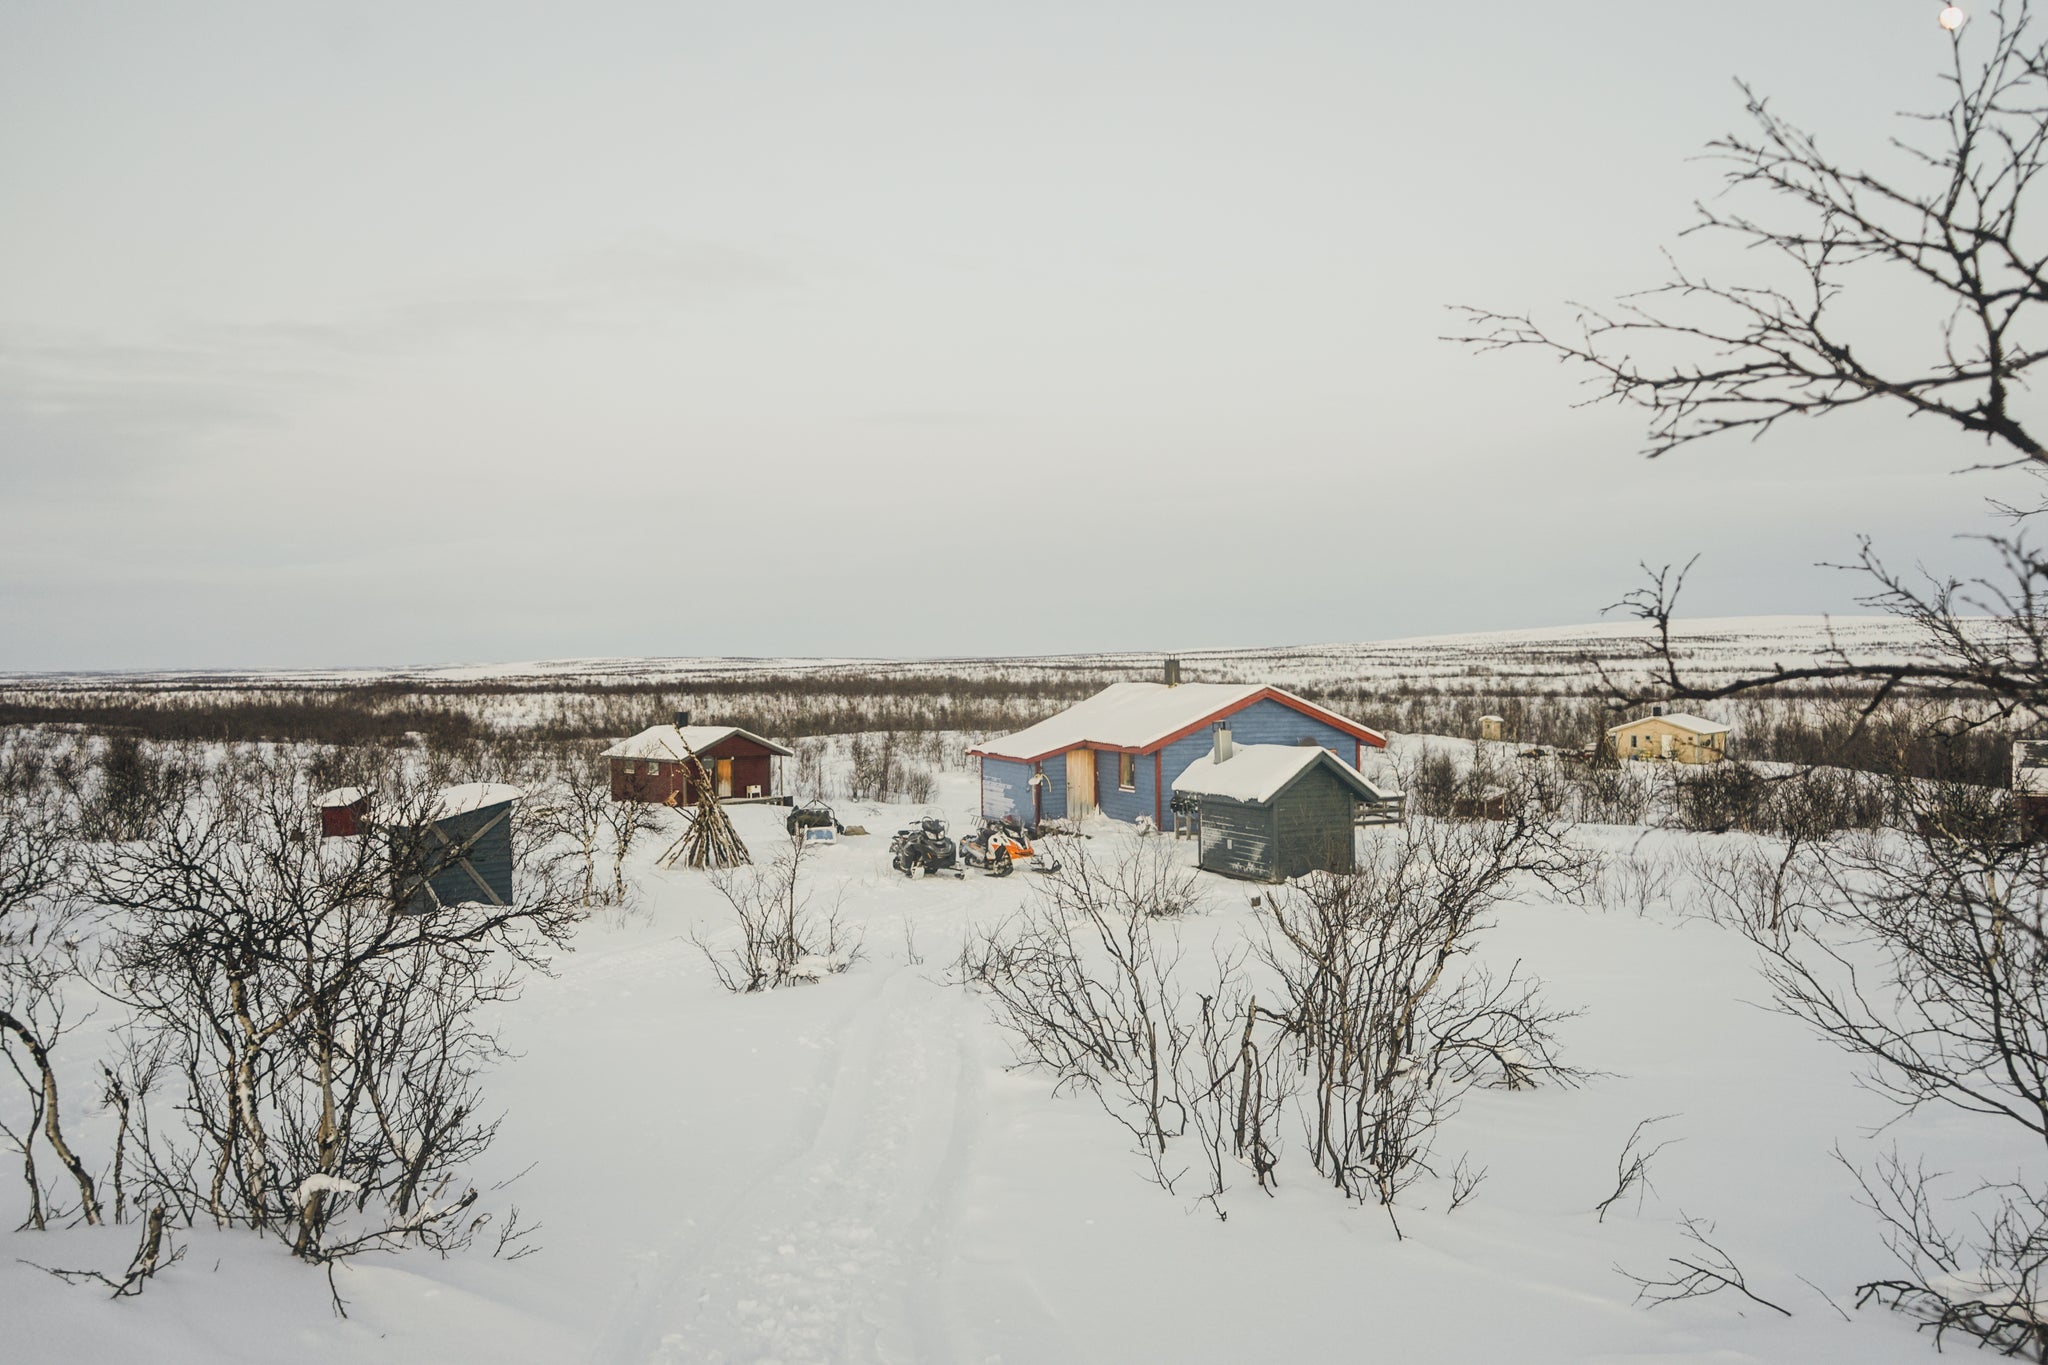 the cabins in the tundra